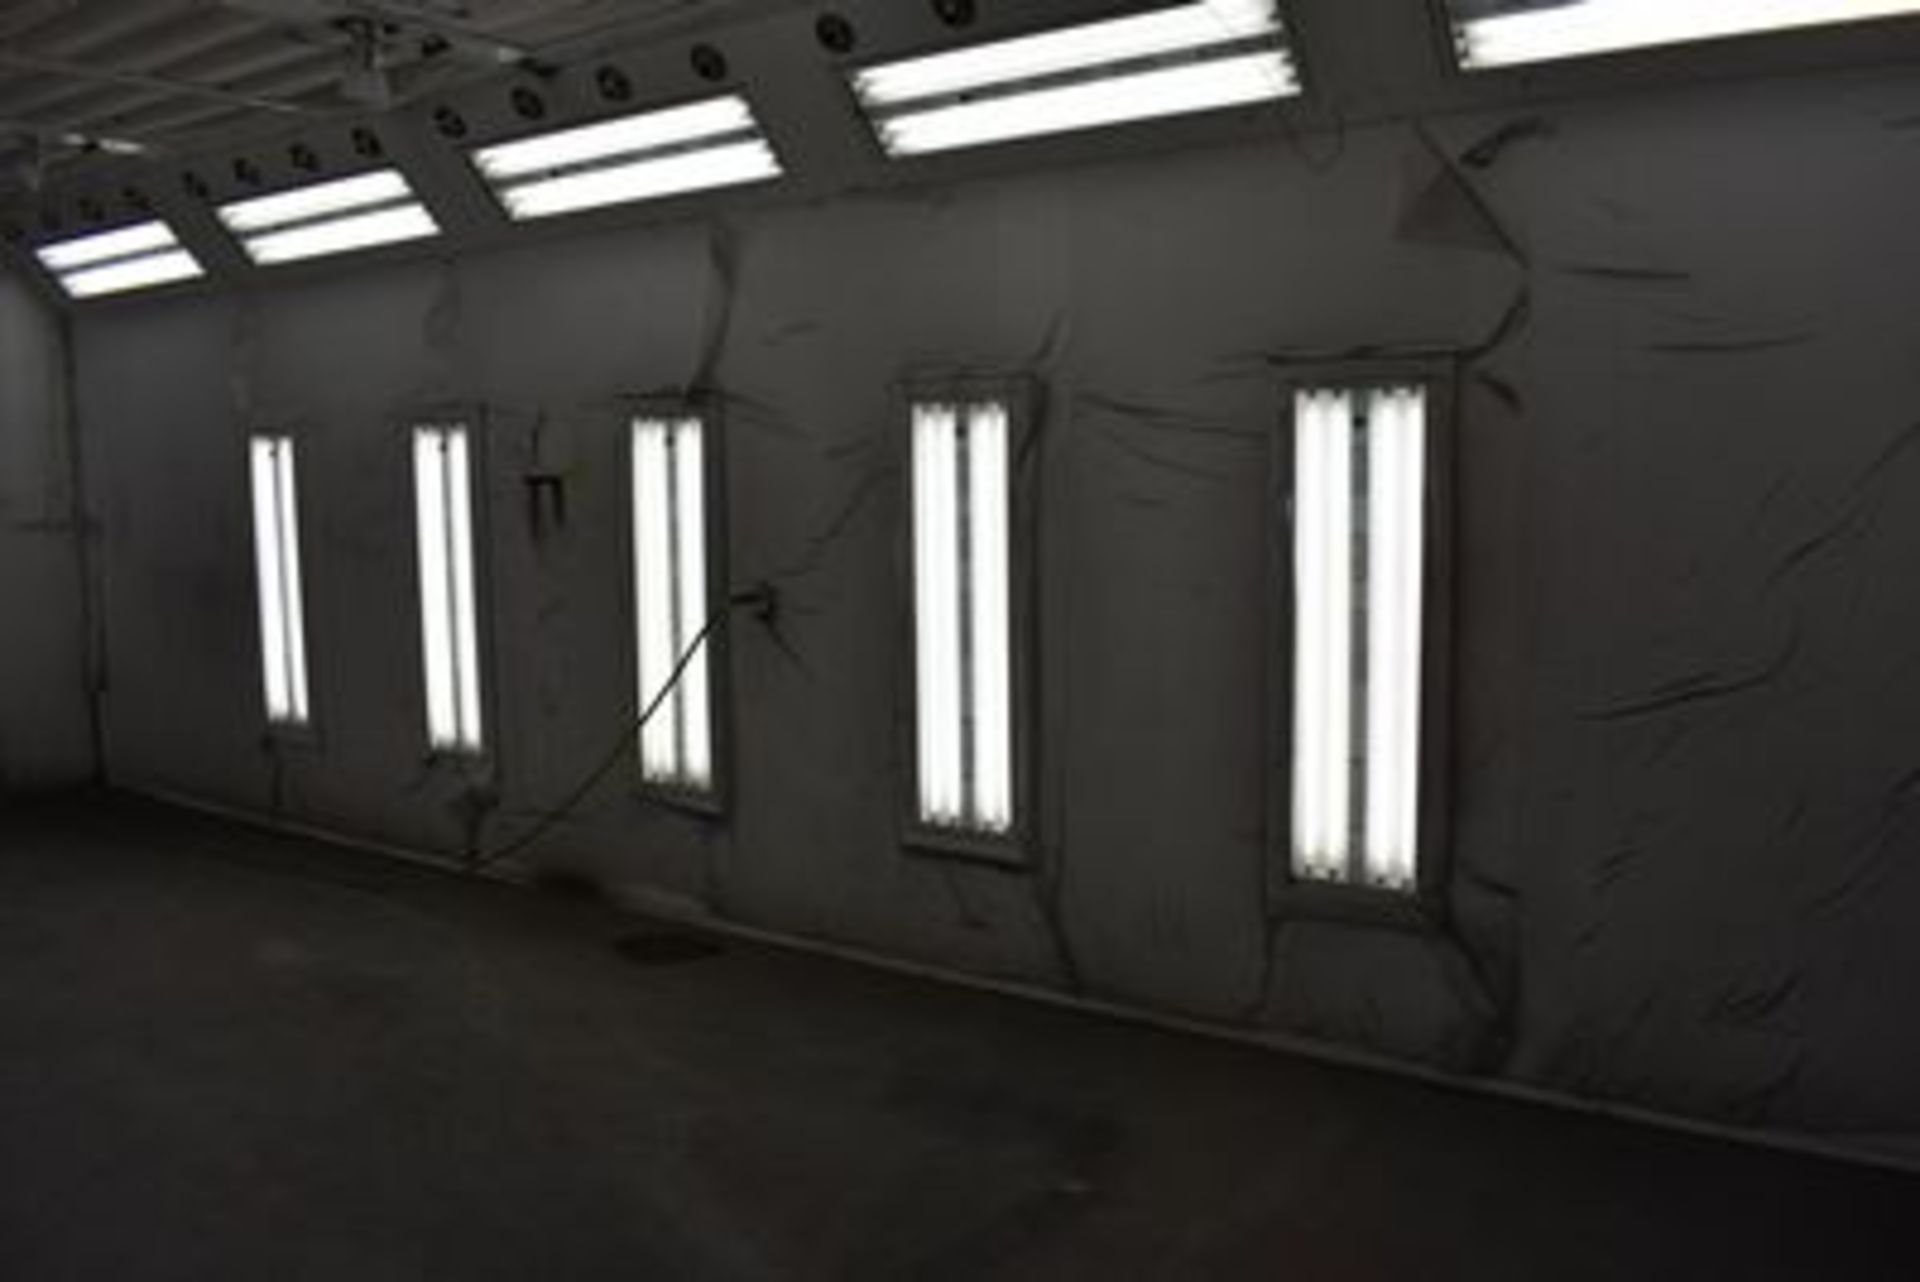 AMERI-CURE INC PAINT BOOTH, 2016, DELAYED REMOVAL: JULY 15, APPROX 22' W X 32' D X 11' TALL - Image 17 of 20